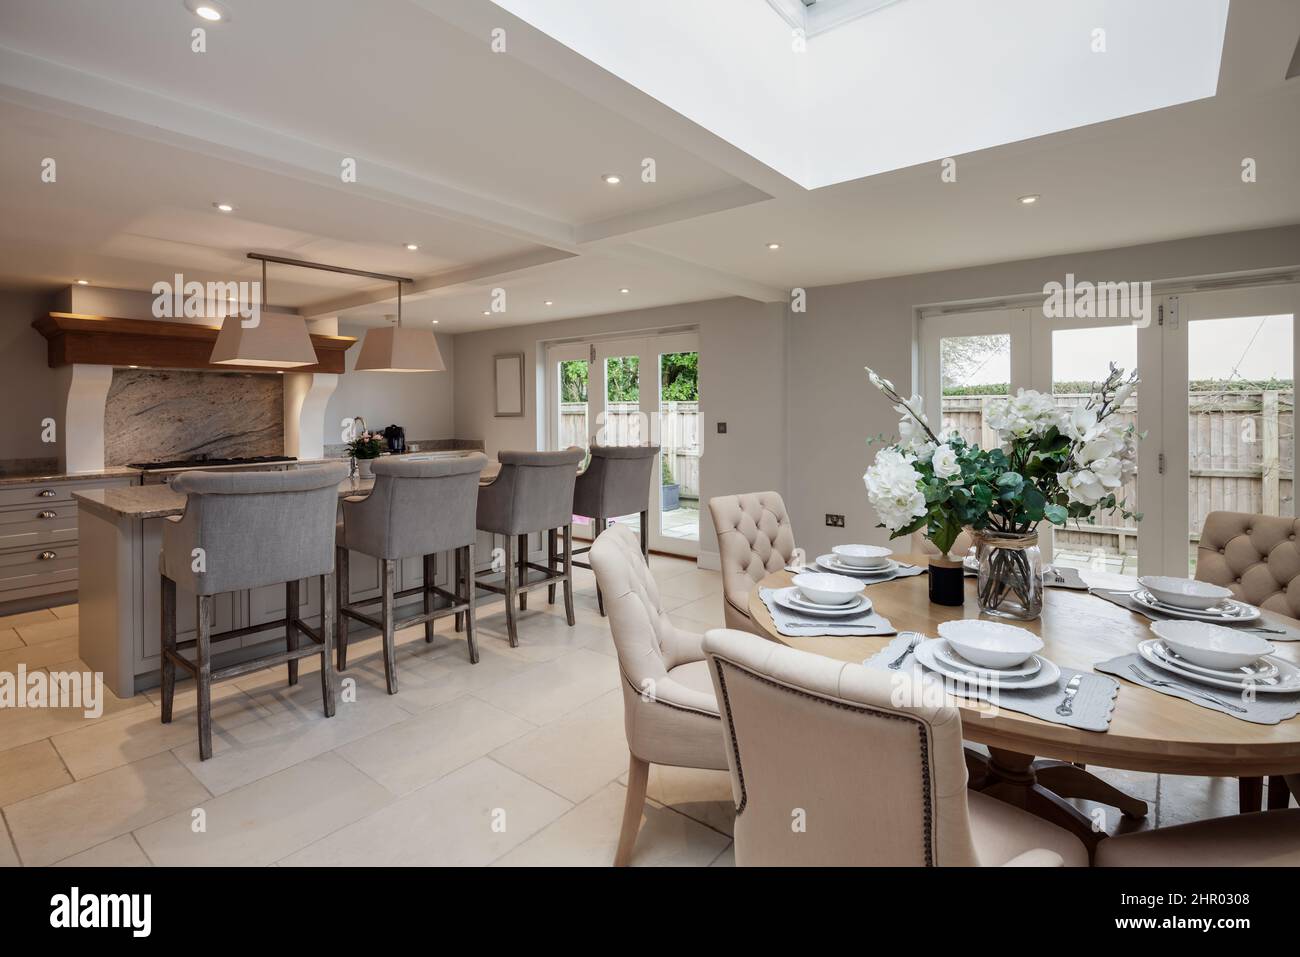 Exceptional luxurious chic fitted kitchen breakfast room with built in appliances including range cooker and marble granite counter tops,  upholstered Stock Photo